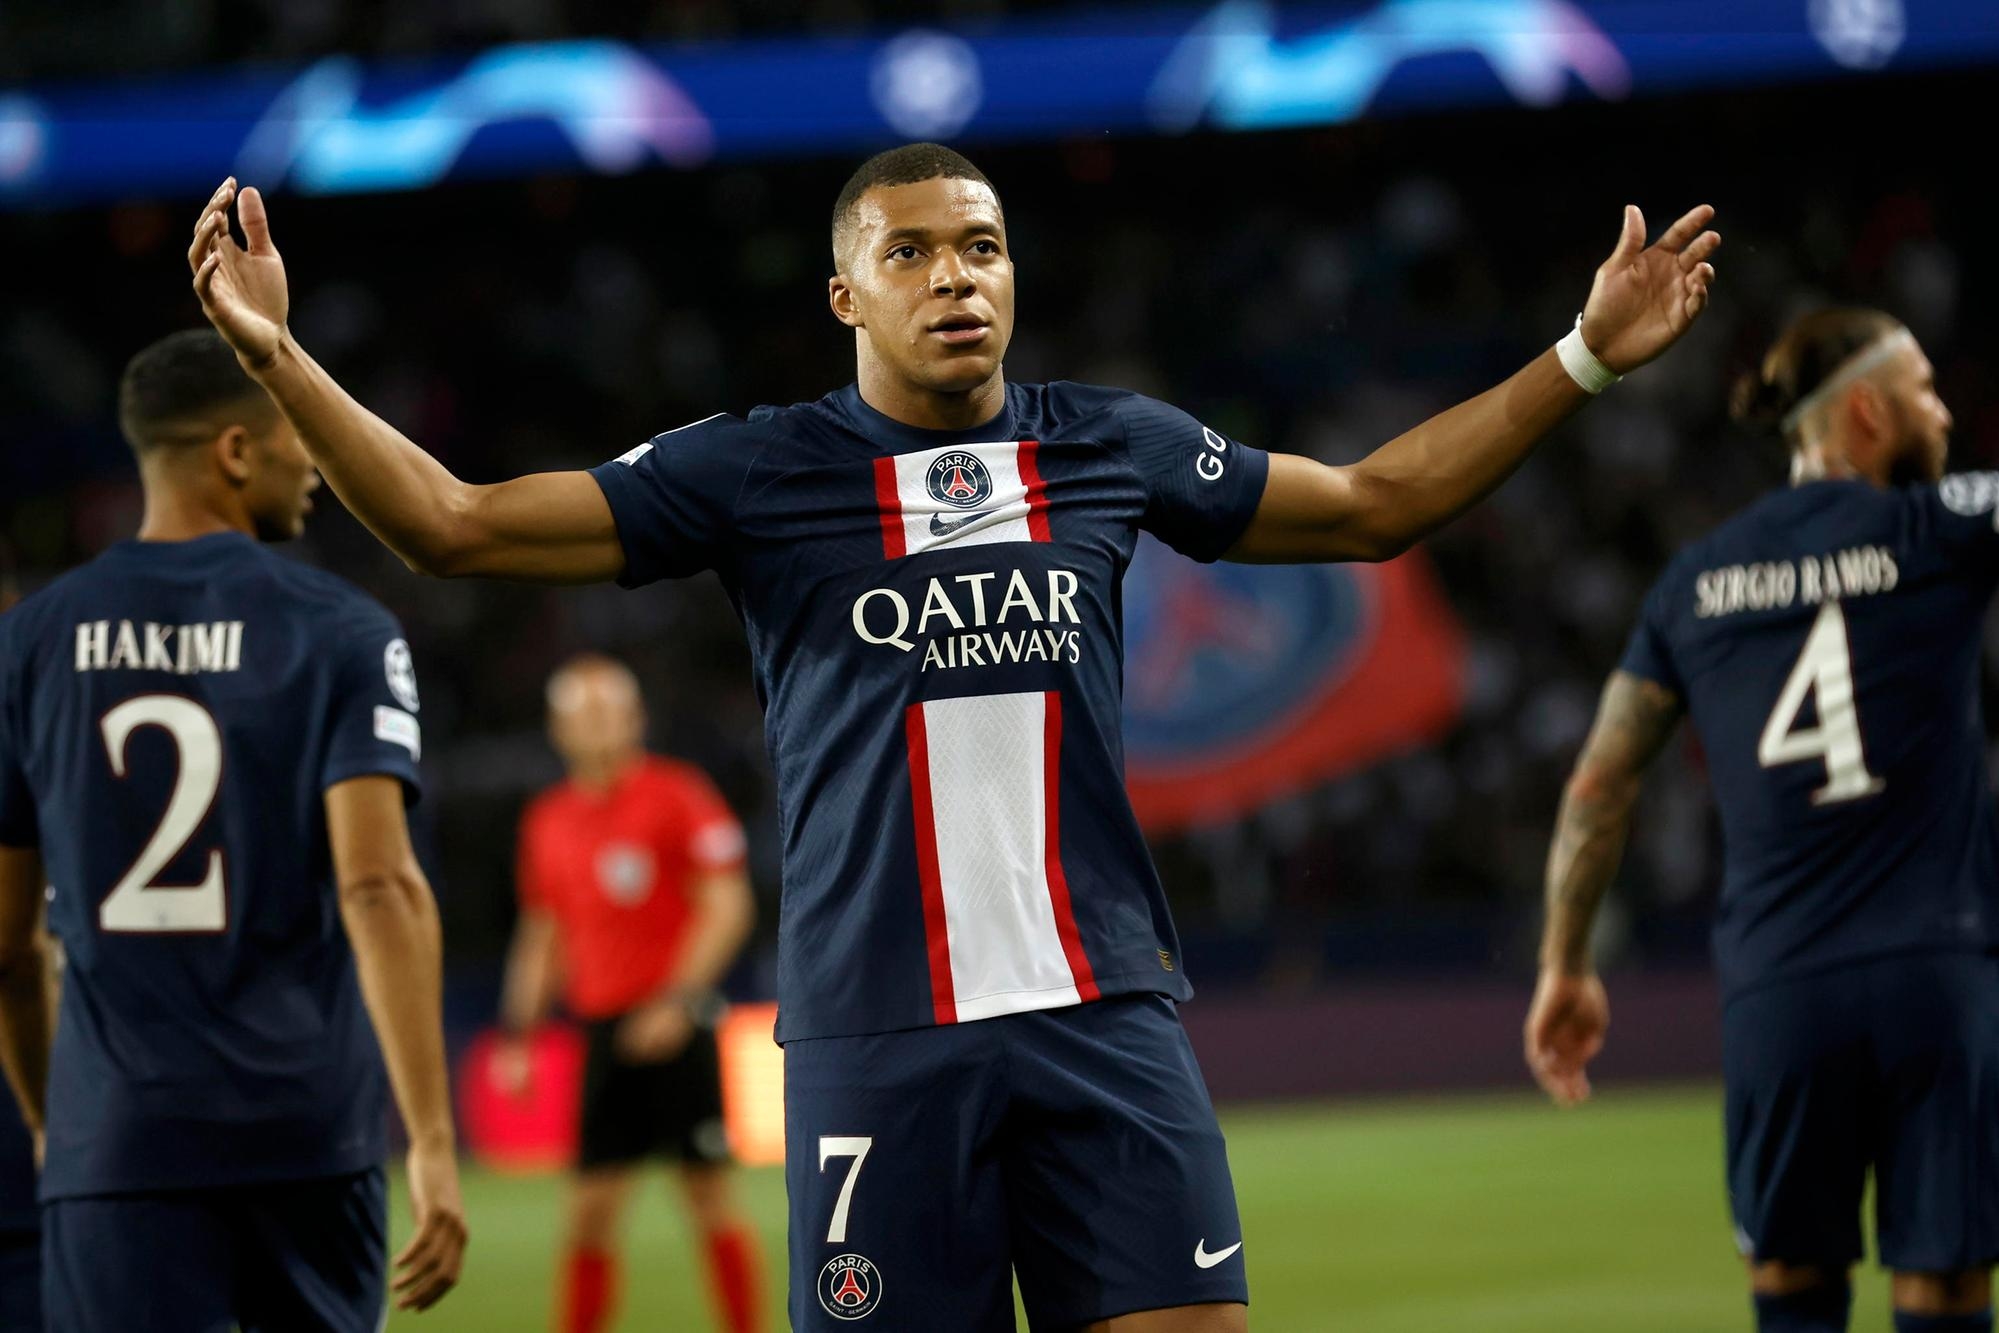 epa10165347 Kylian Mbappe of PSG celebrates after scoring his second goal in the UEFA Champions League first leg group H soccer match between Paris Saint-Germain (PSG) and Juventus FC in Paris, France, 06 September 2022. EPA/Yoan Valat